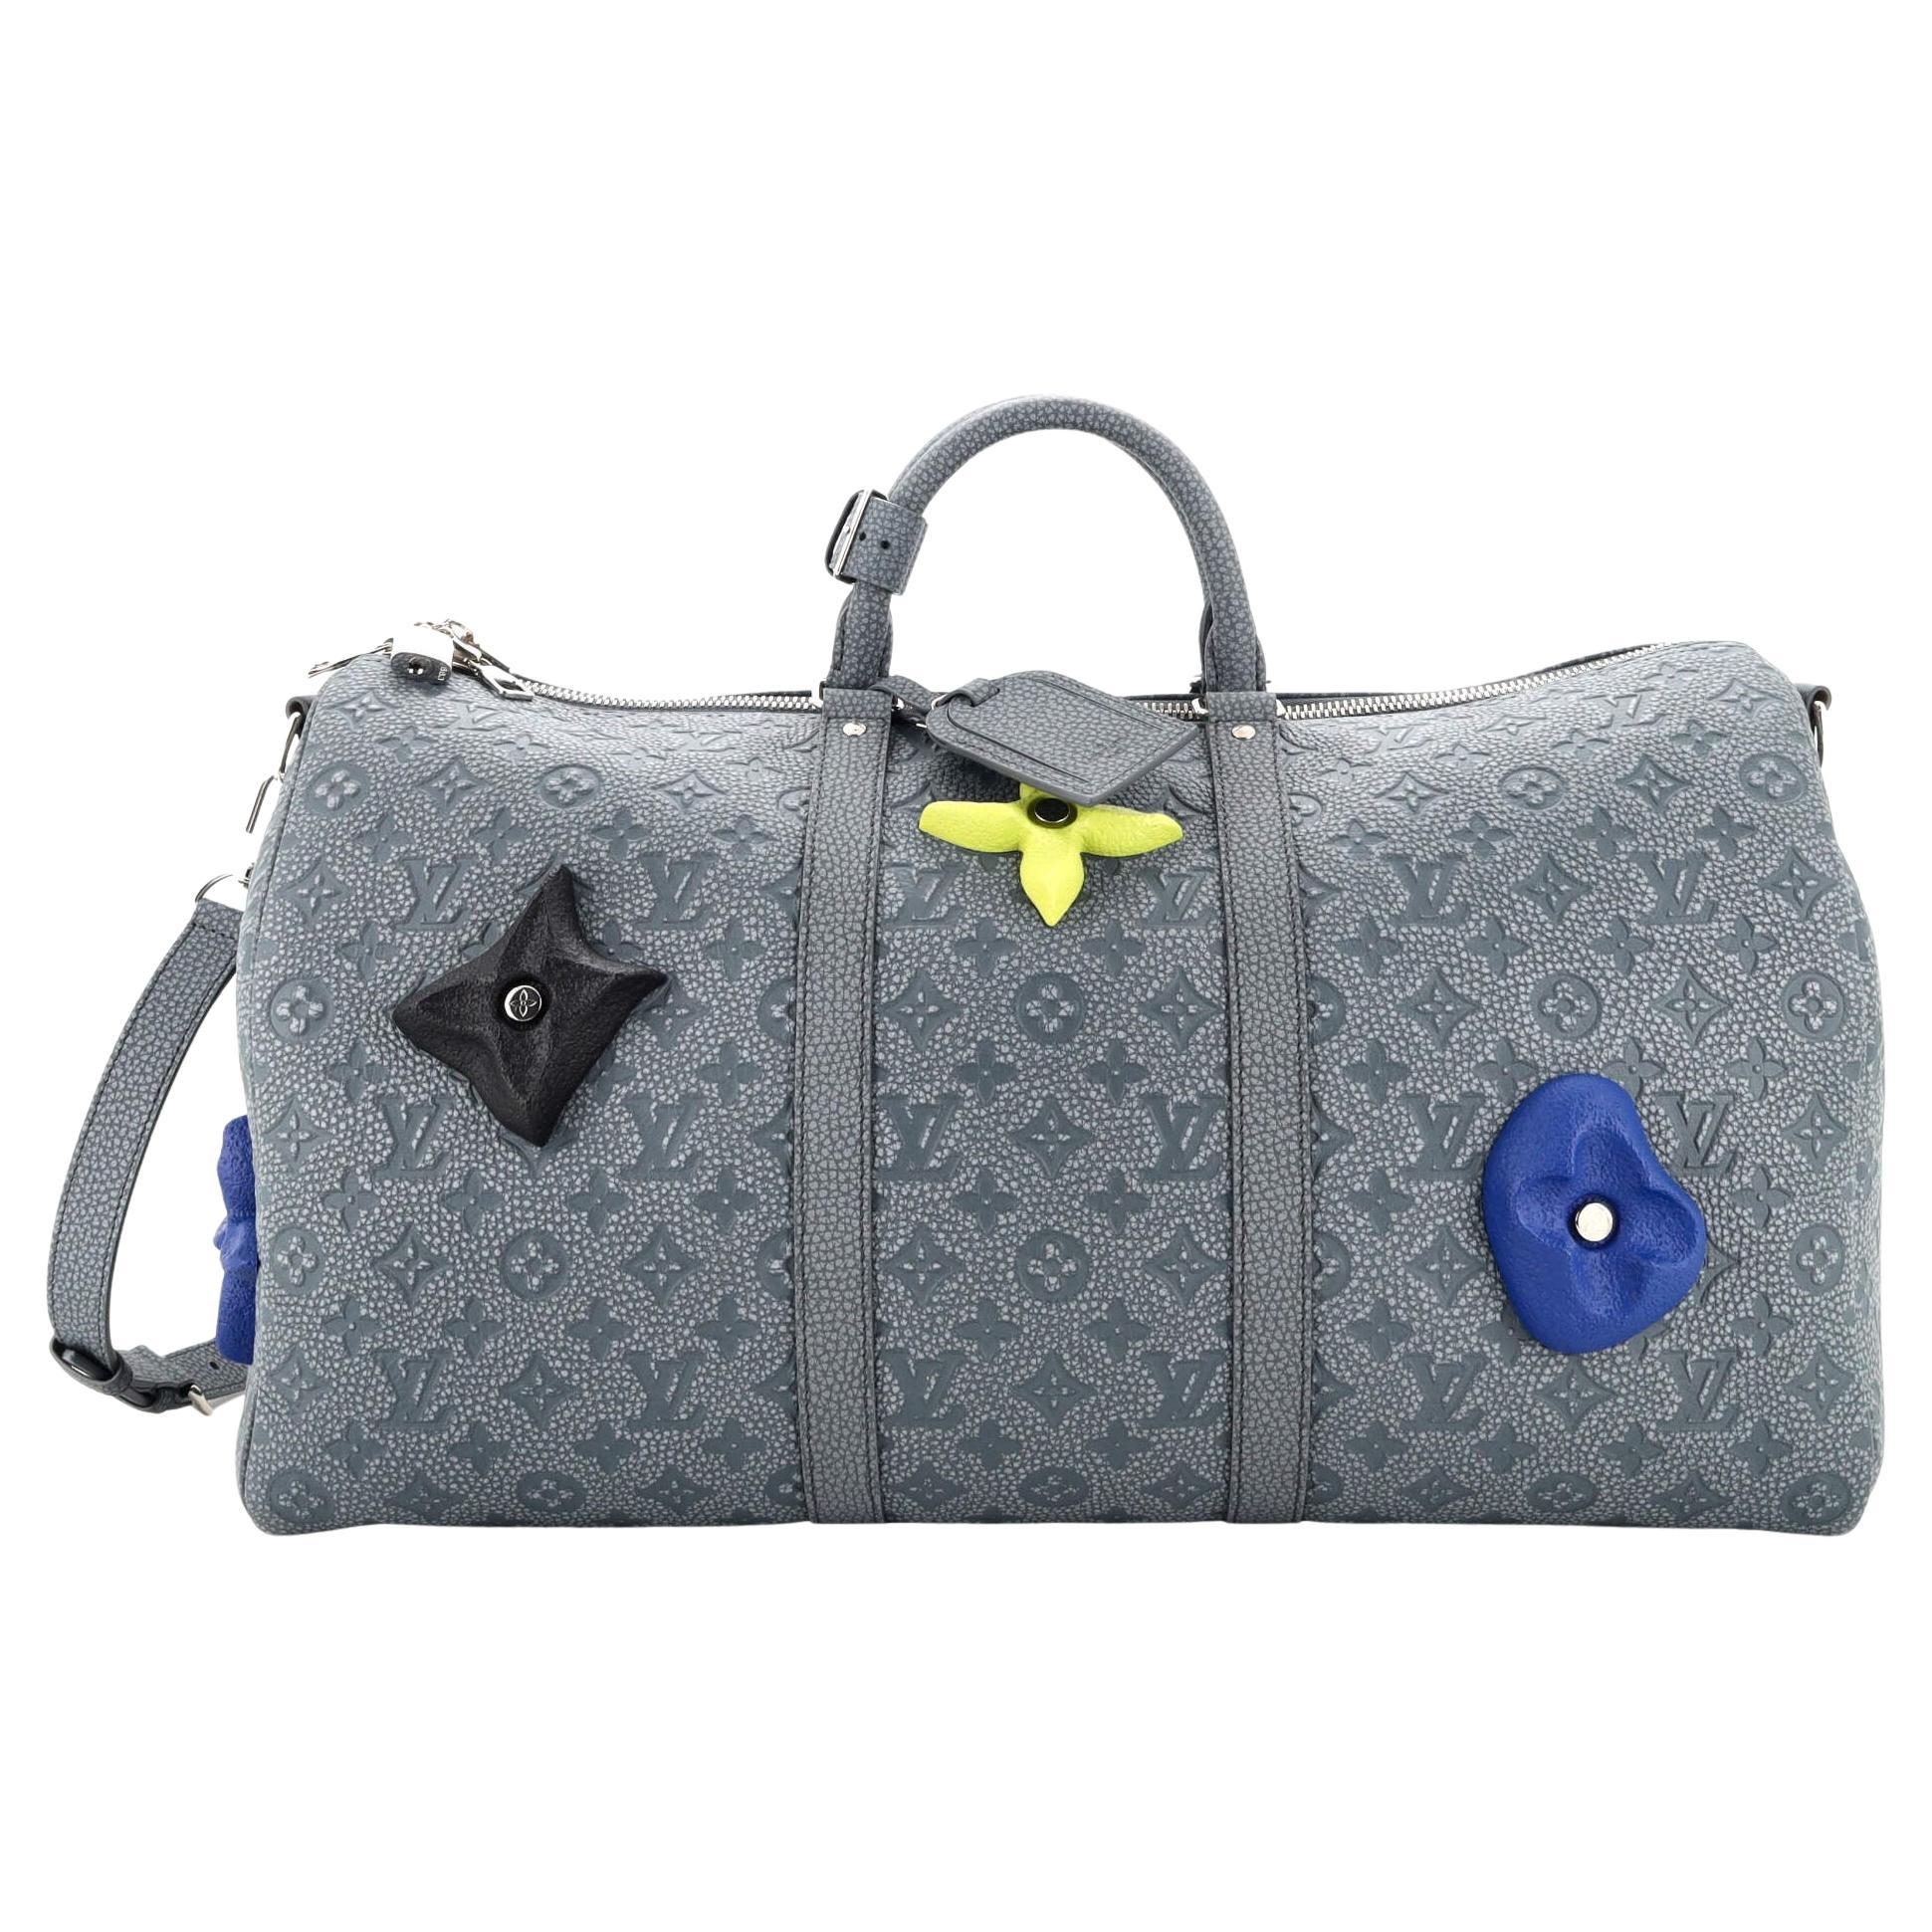 Louis Vuitton Climbing Keepall Bandouliere Bag Limited Edition Monogram 